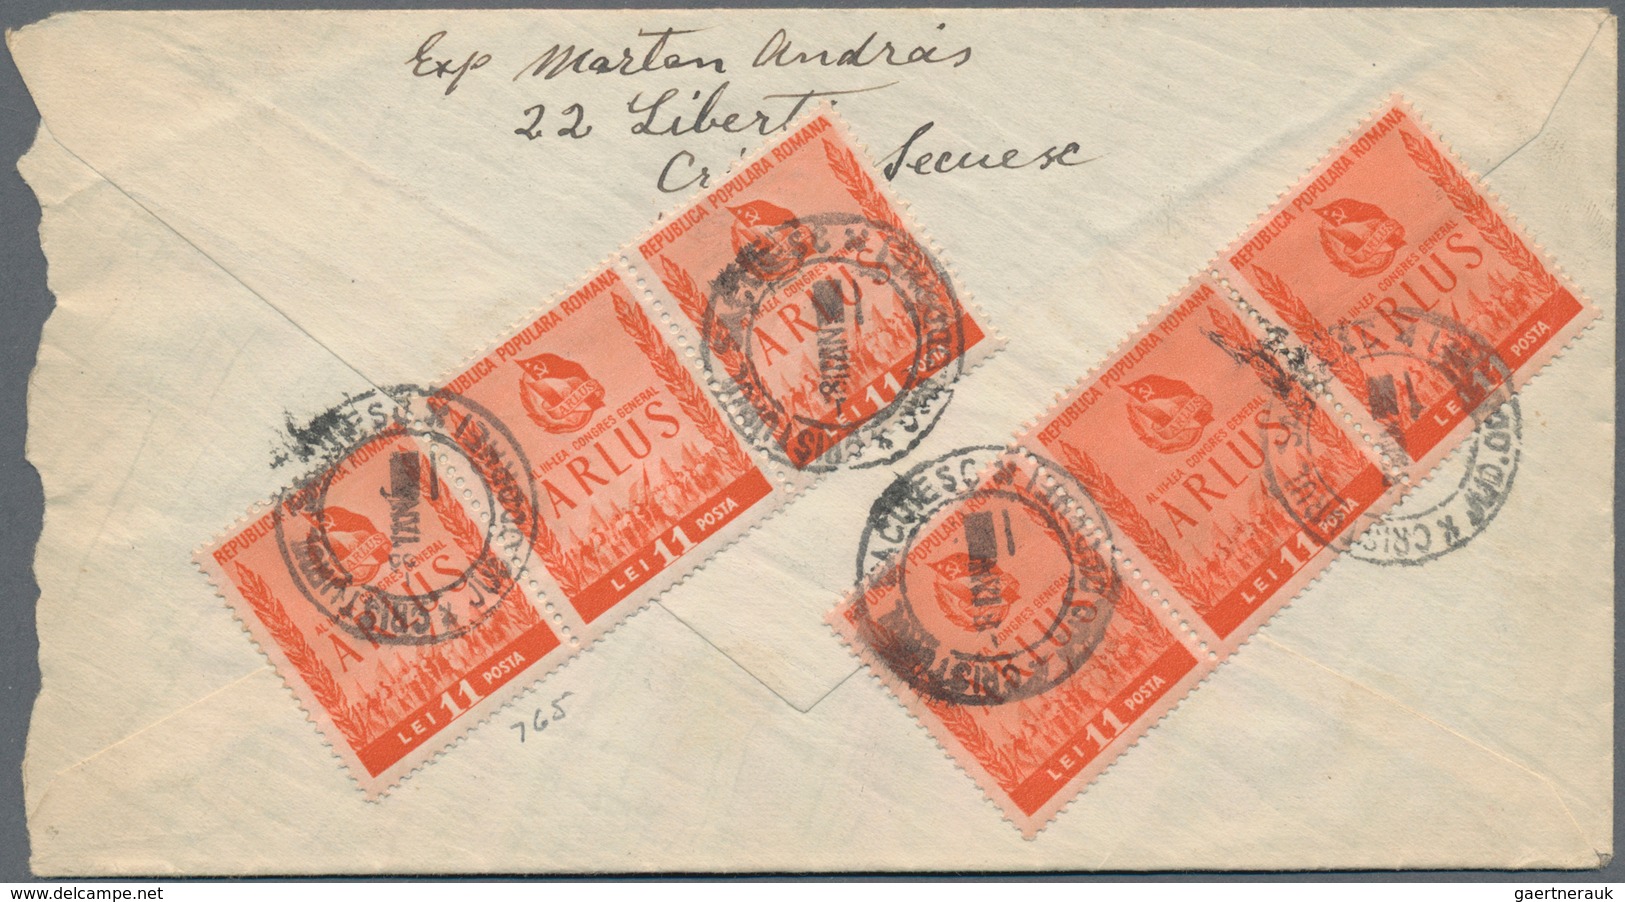 Rumänien: 1945/1965, holding of apprx. 137 covers/cards showing an attractive range of interesting f